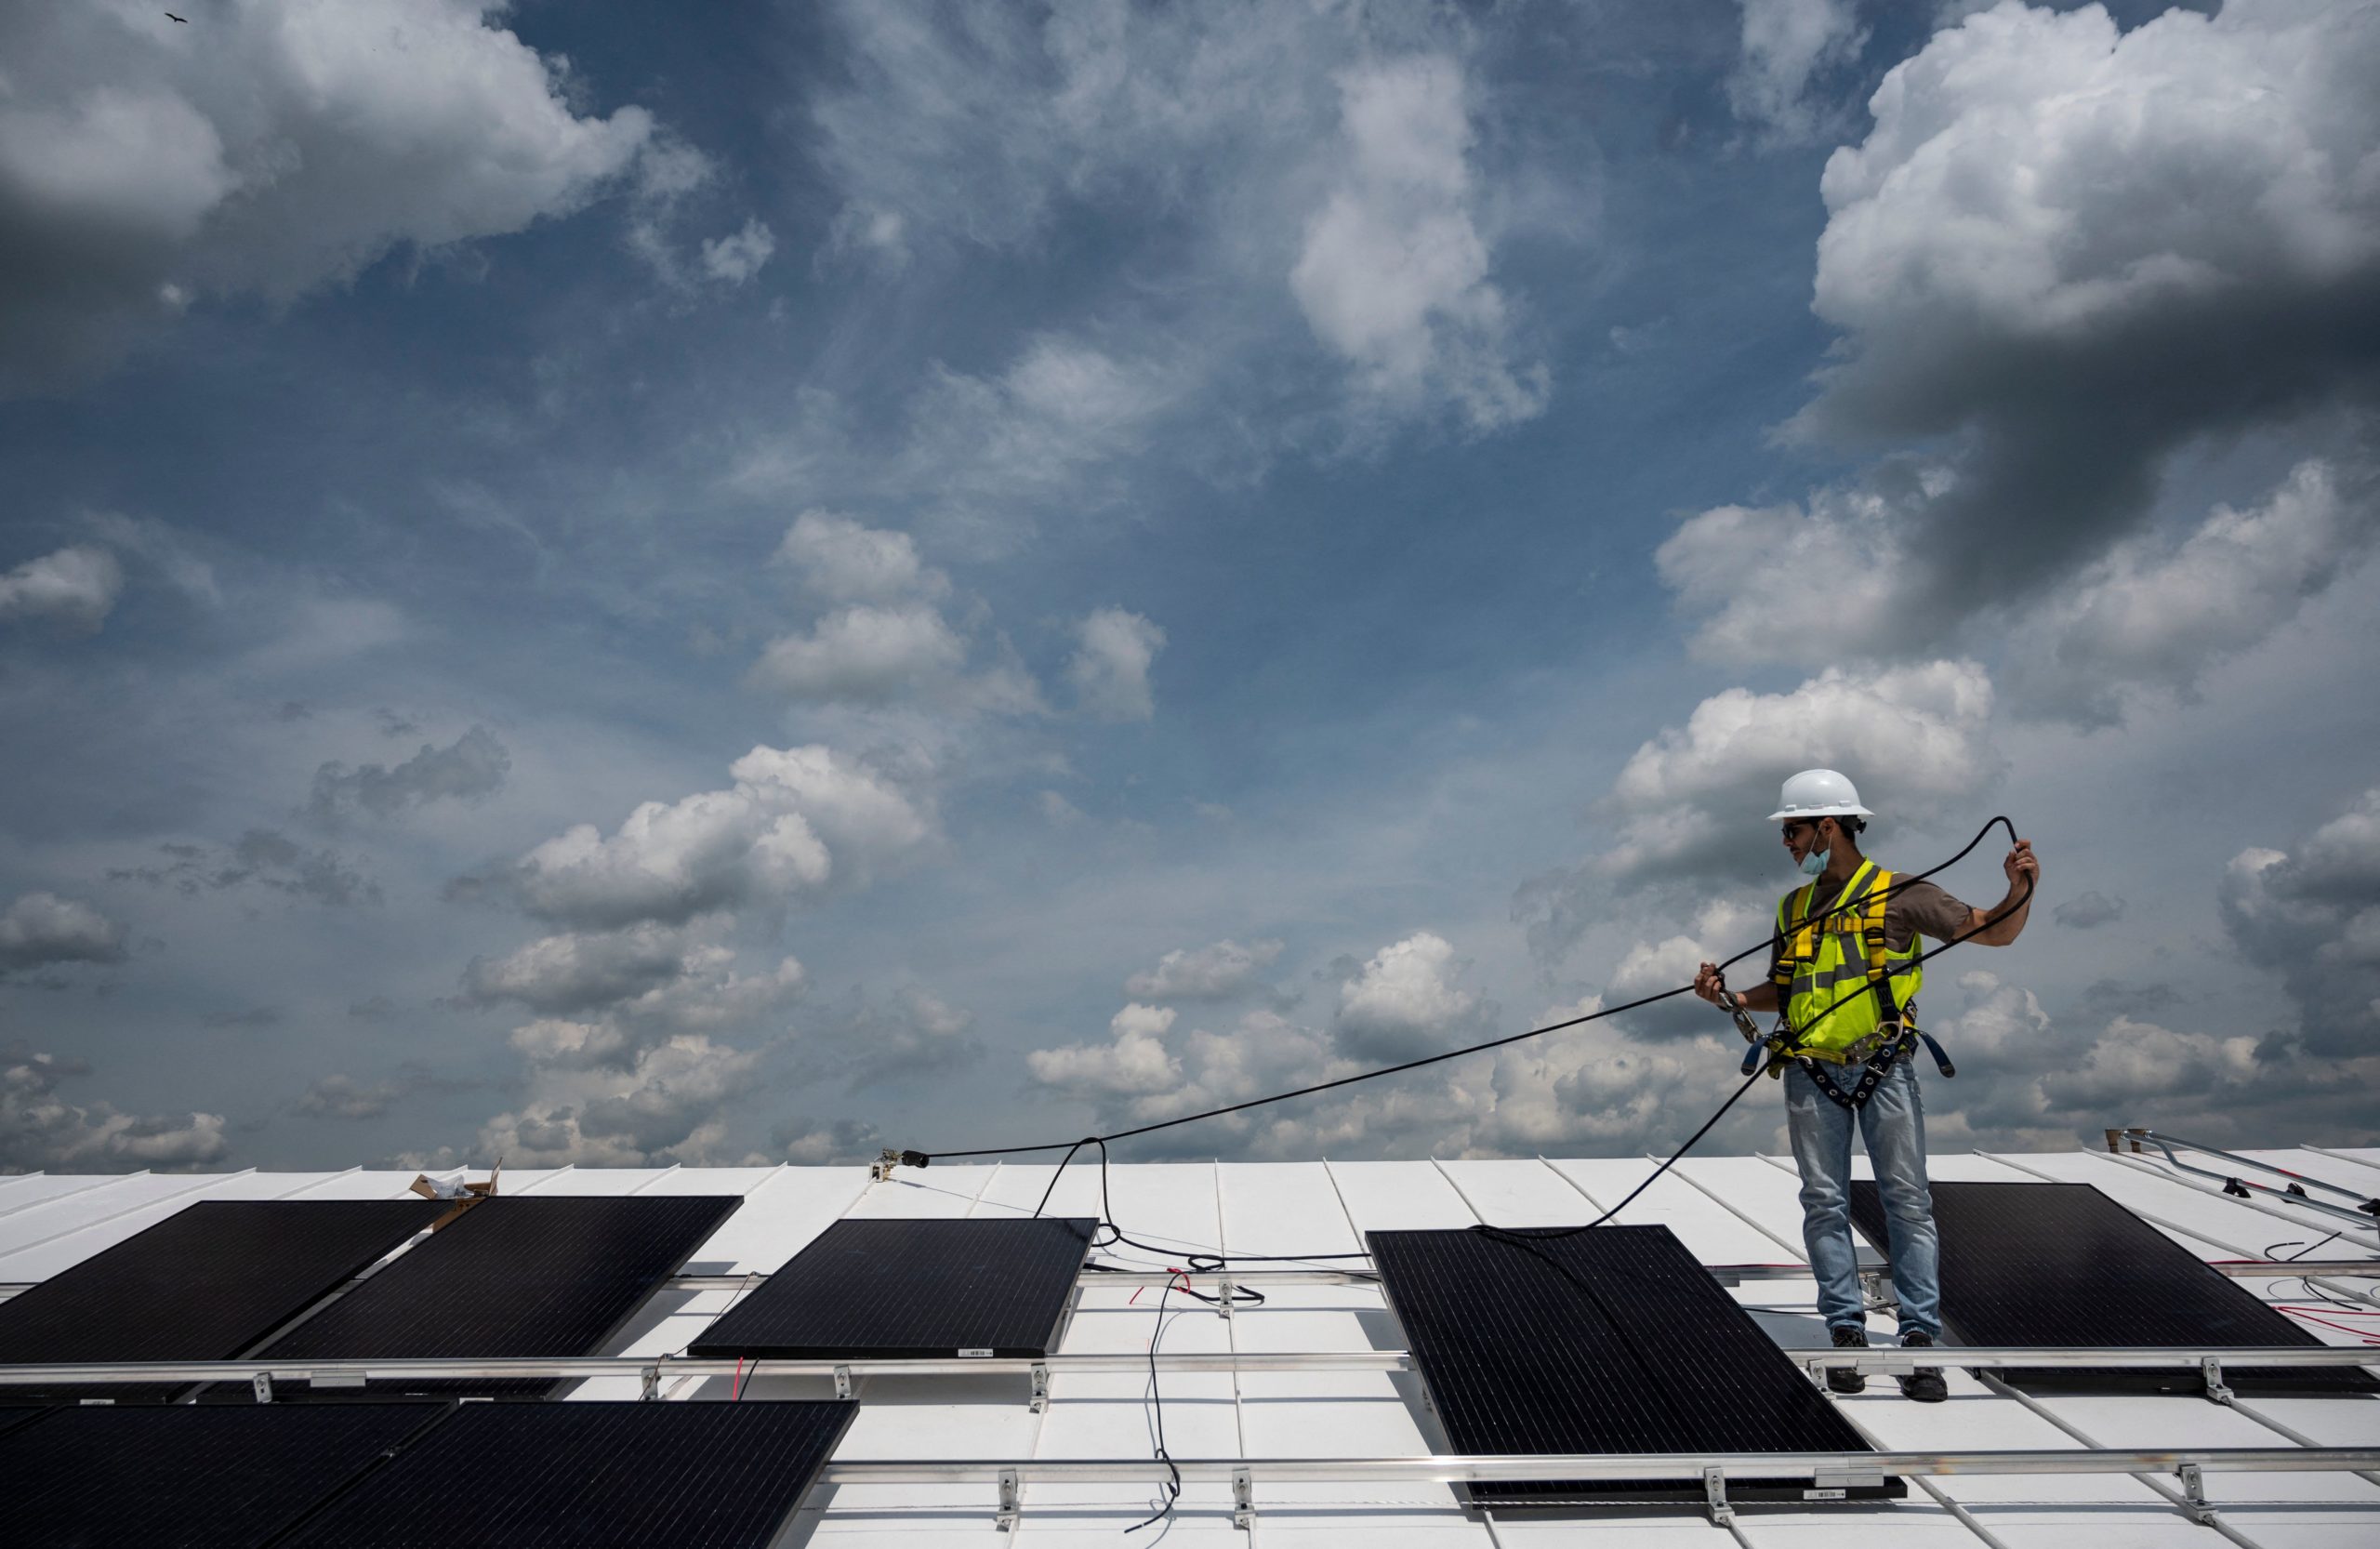 A worker installs solar panels on the roof of a church in Alexandria, Virginia on May 17. (Andrew Caballero-Reynolds/AFP via Getty Images)